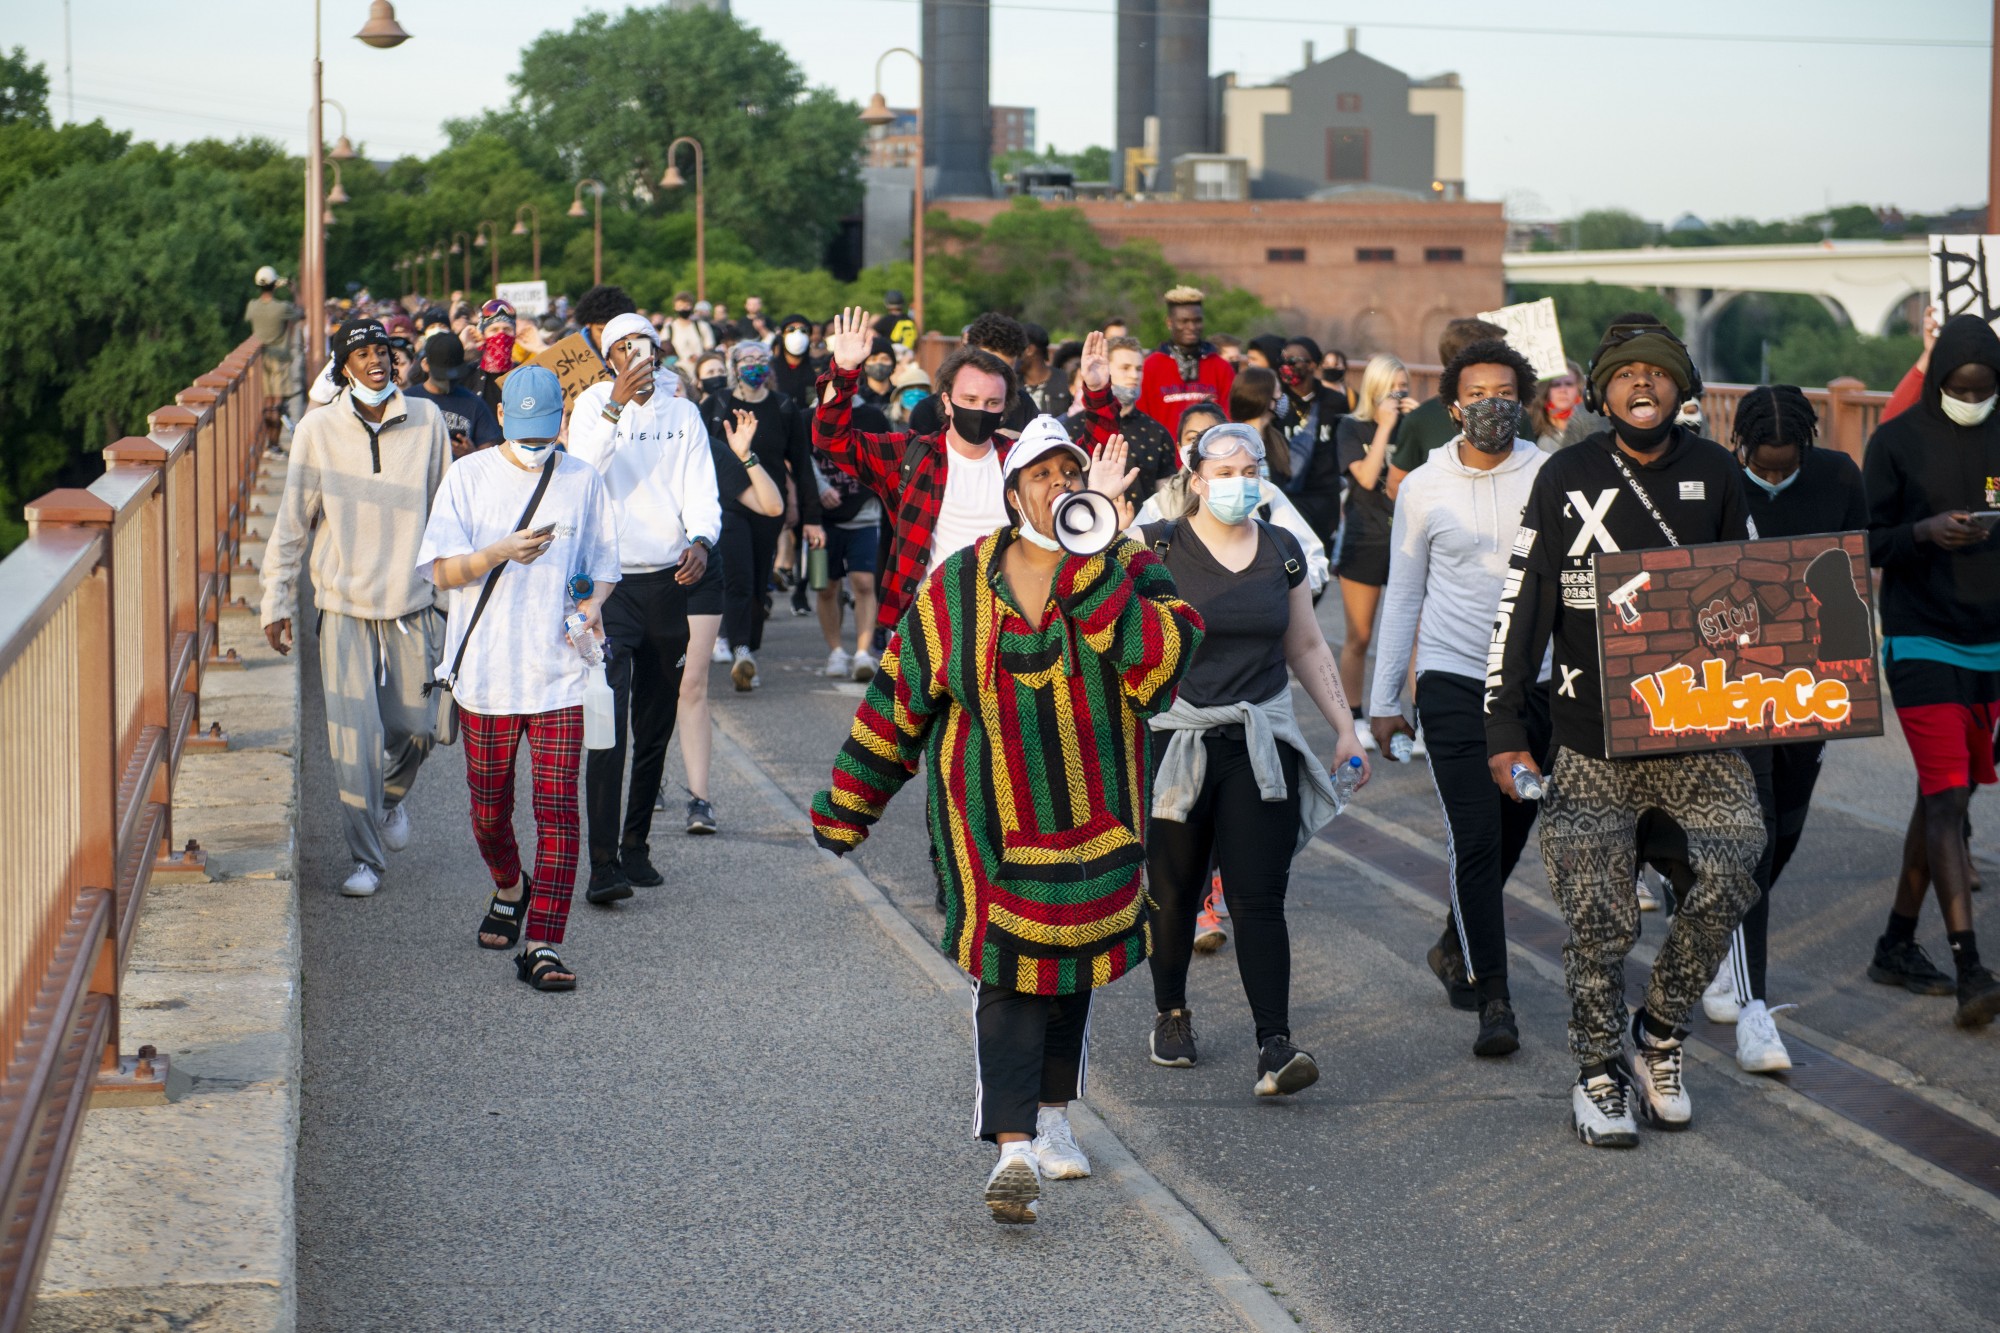 Demonstrators make their way through parts of campus as curfew nears, eventually crossing the Stone Arch Bridge and into downtown on Sunday, May 31. 